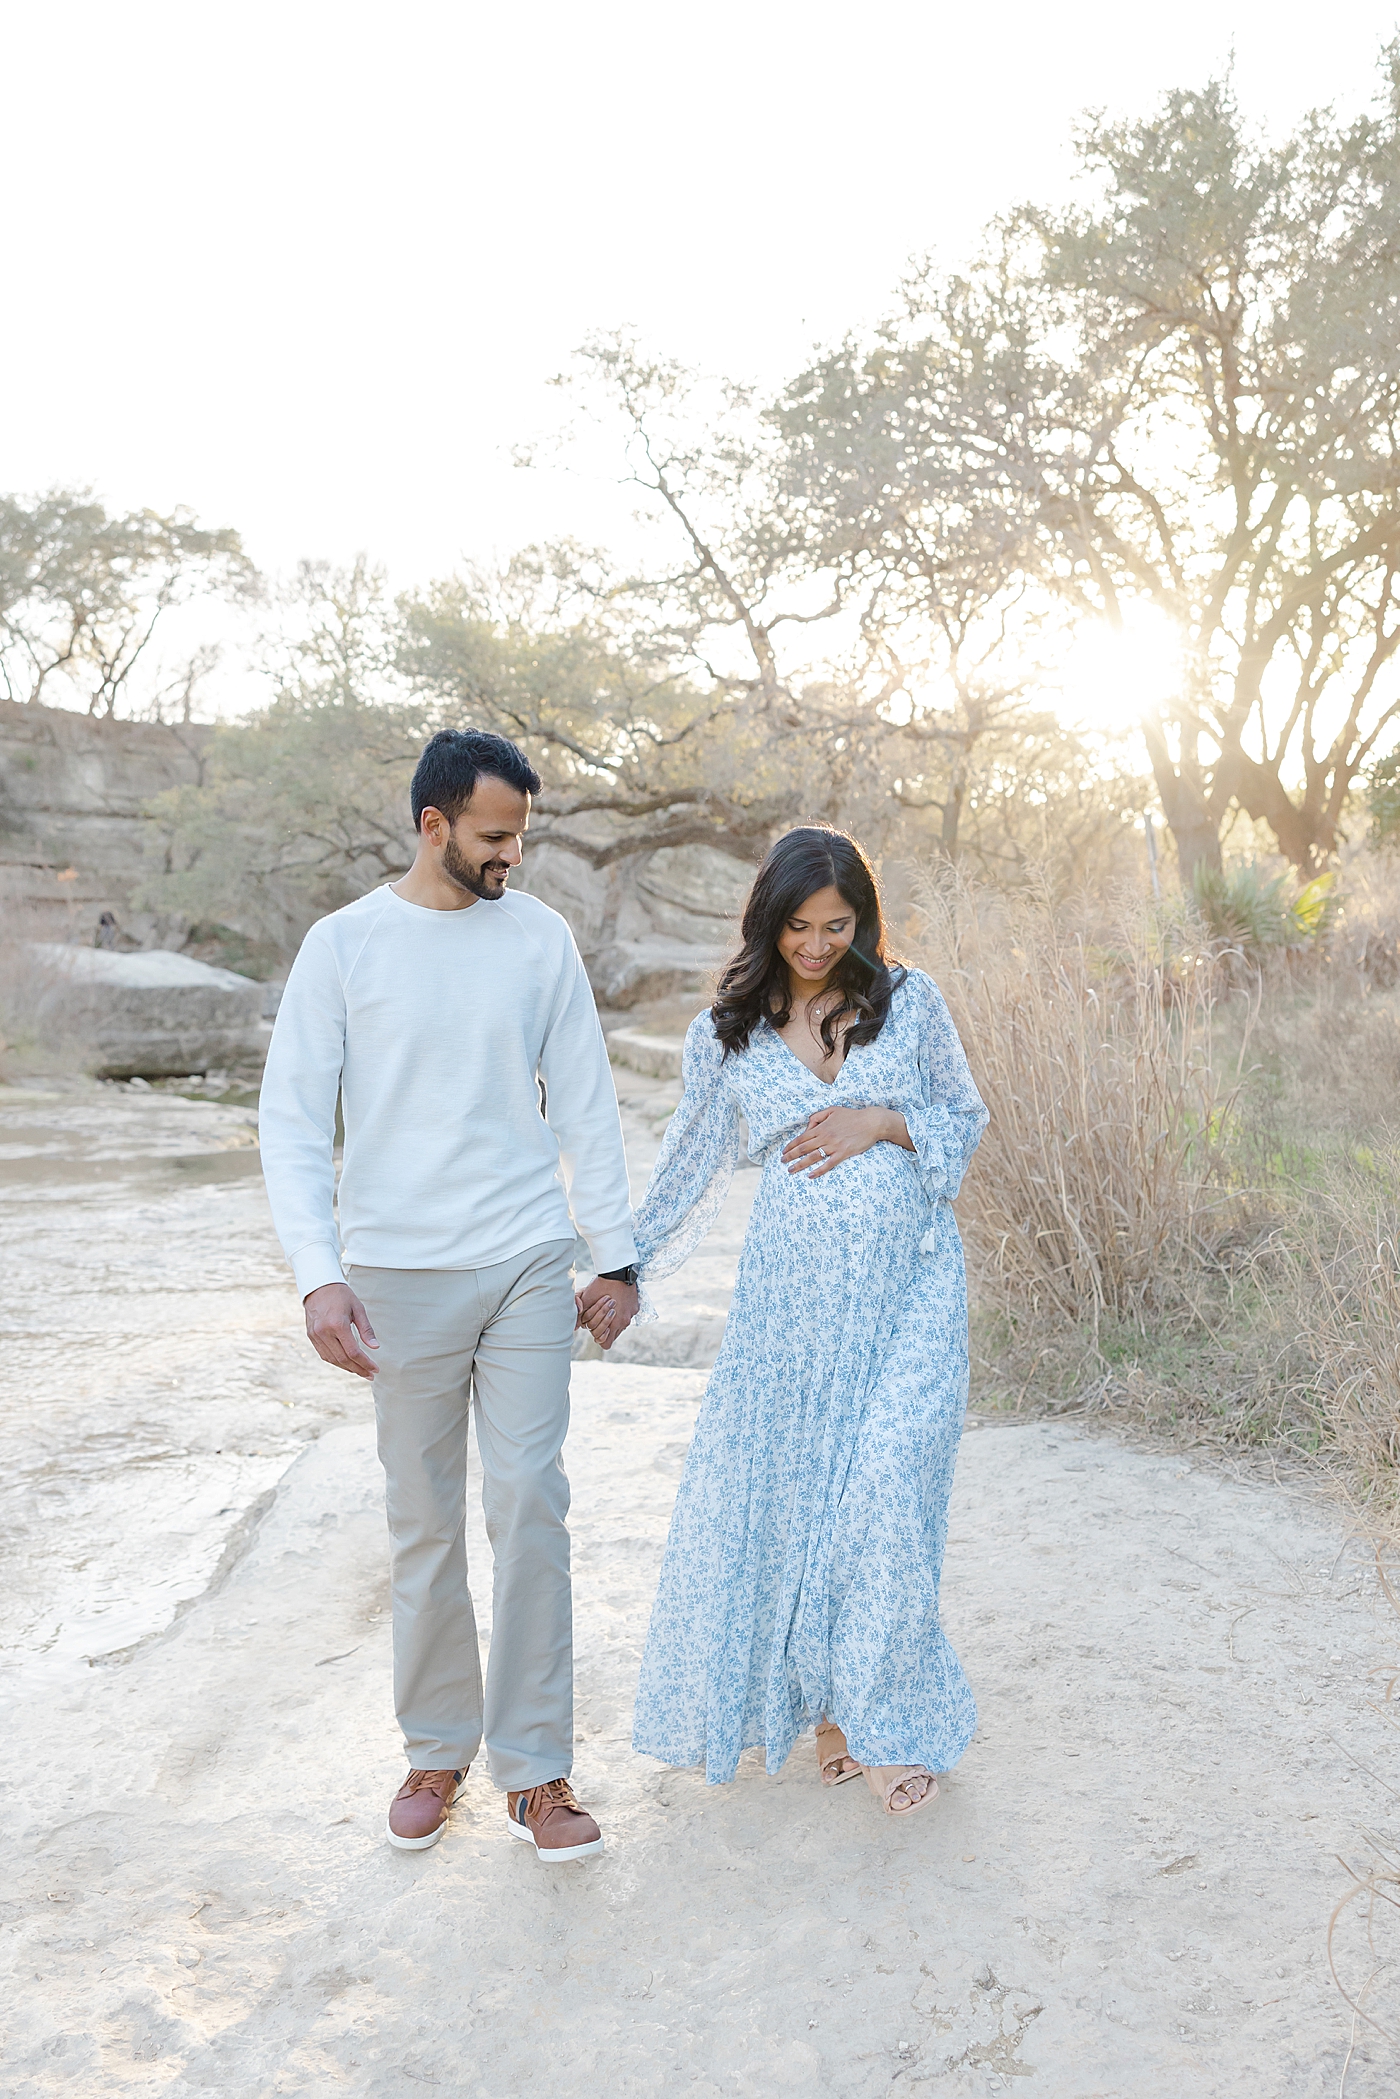 Mom and dad to be walking while holding hands | Image by Sana Ahmed